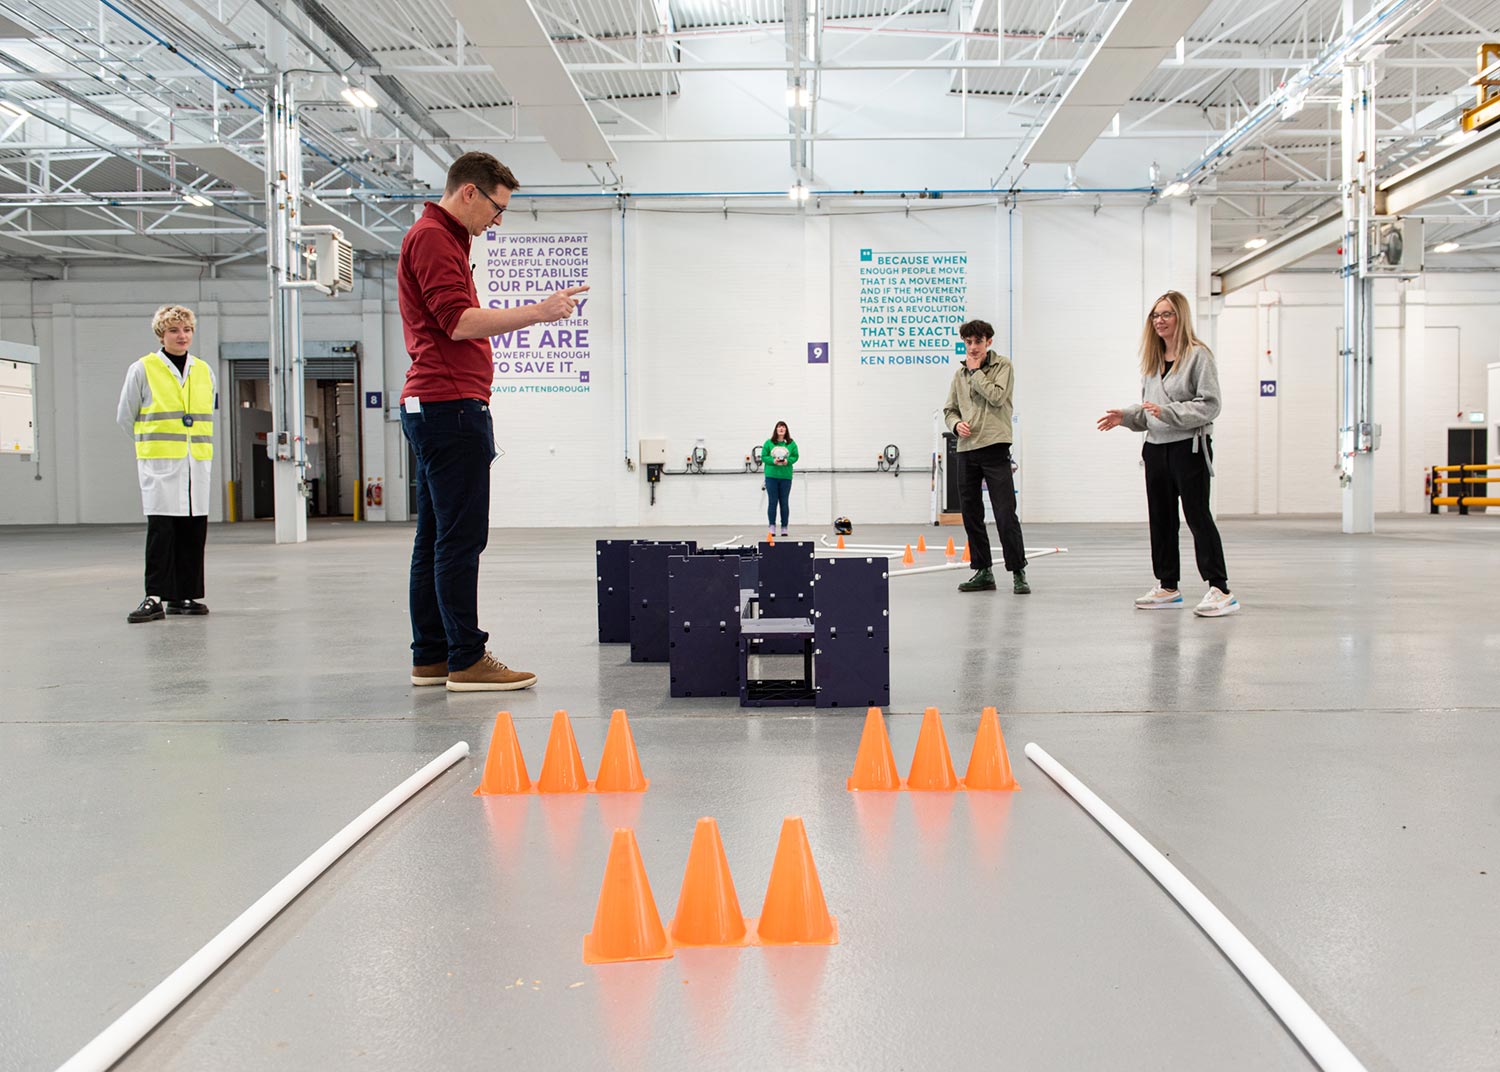 3 people in a large white warehouse space point and gesture as they try to naviagte a track of blocks and cones.